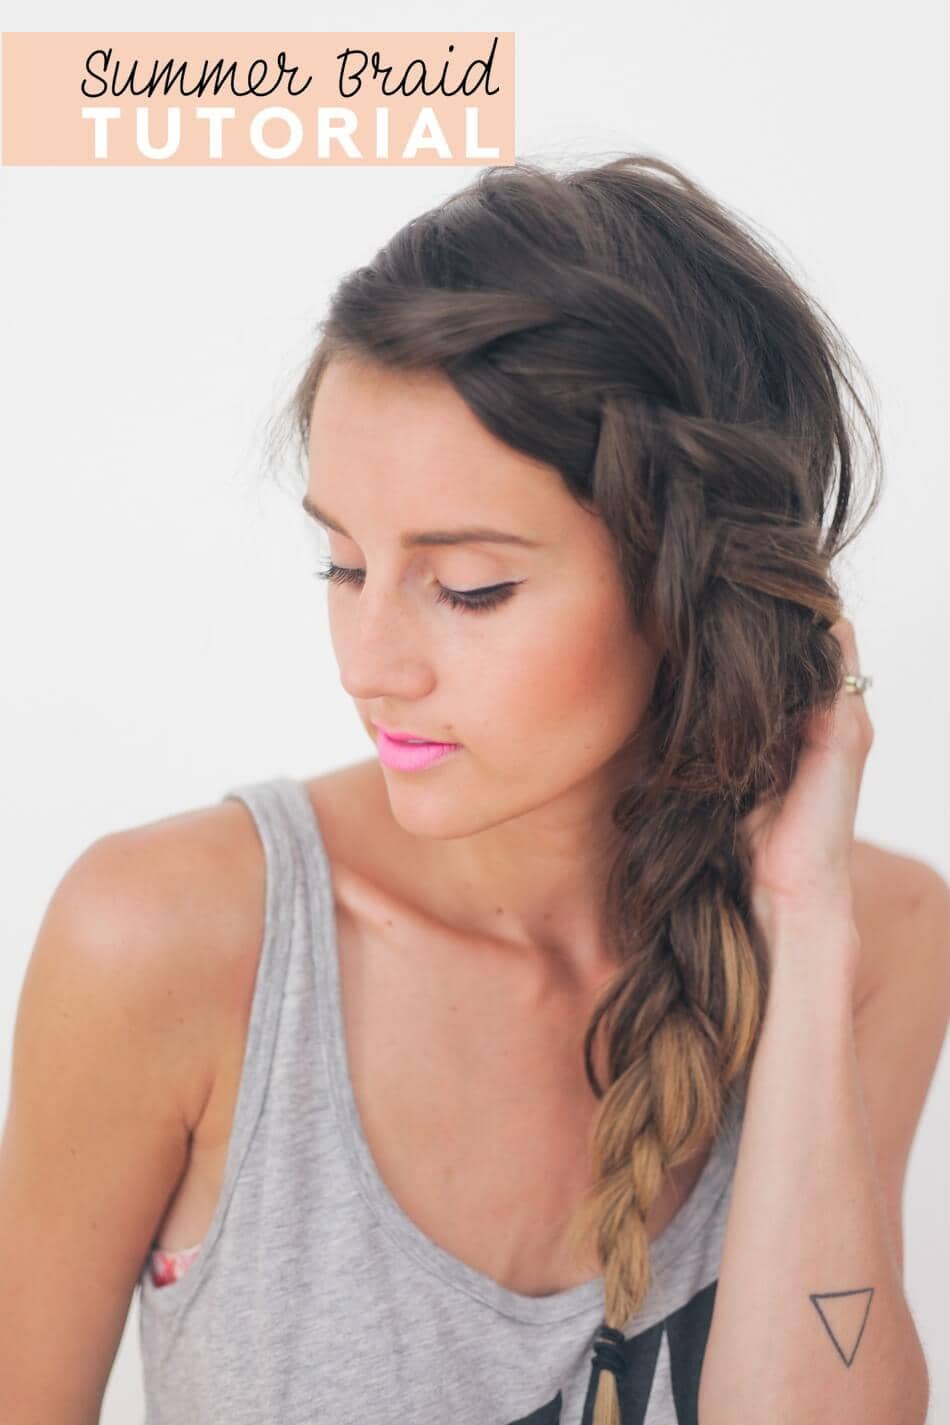 Keep cool with this side braid